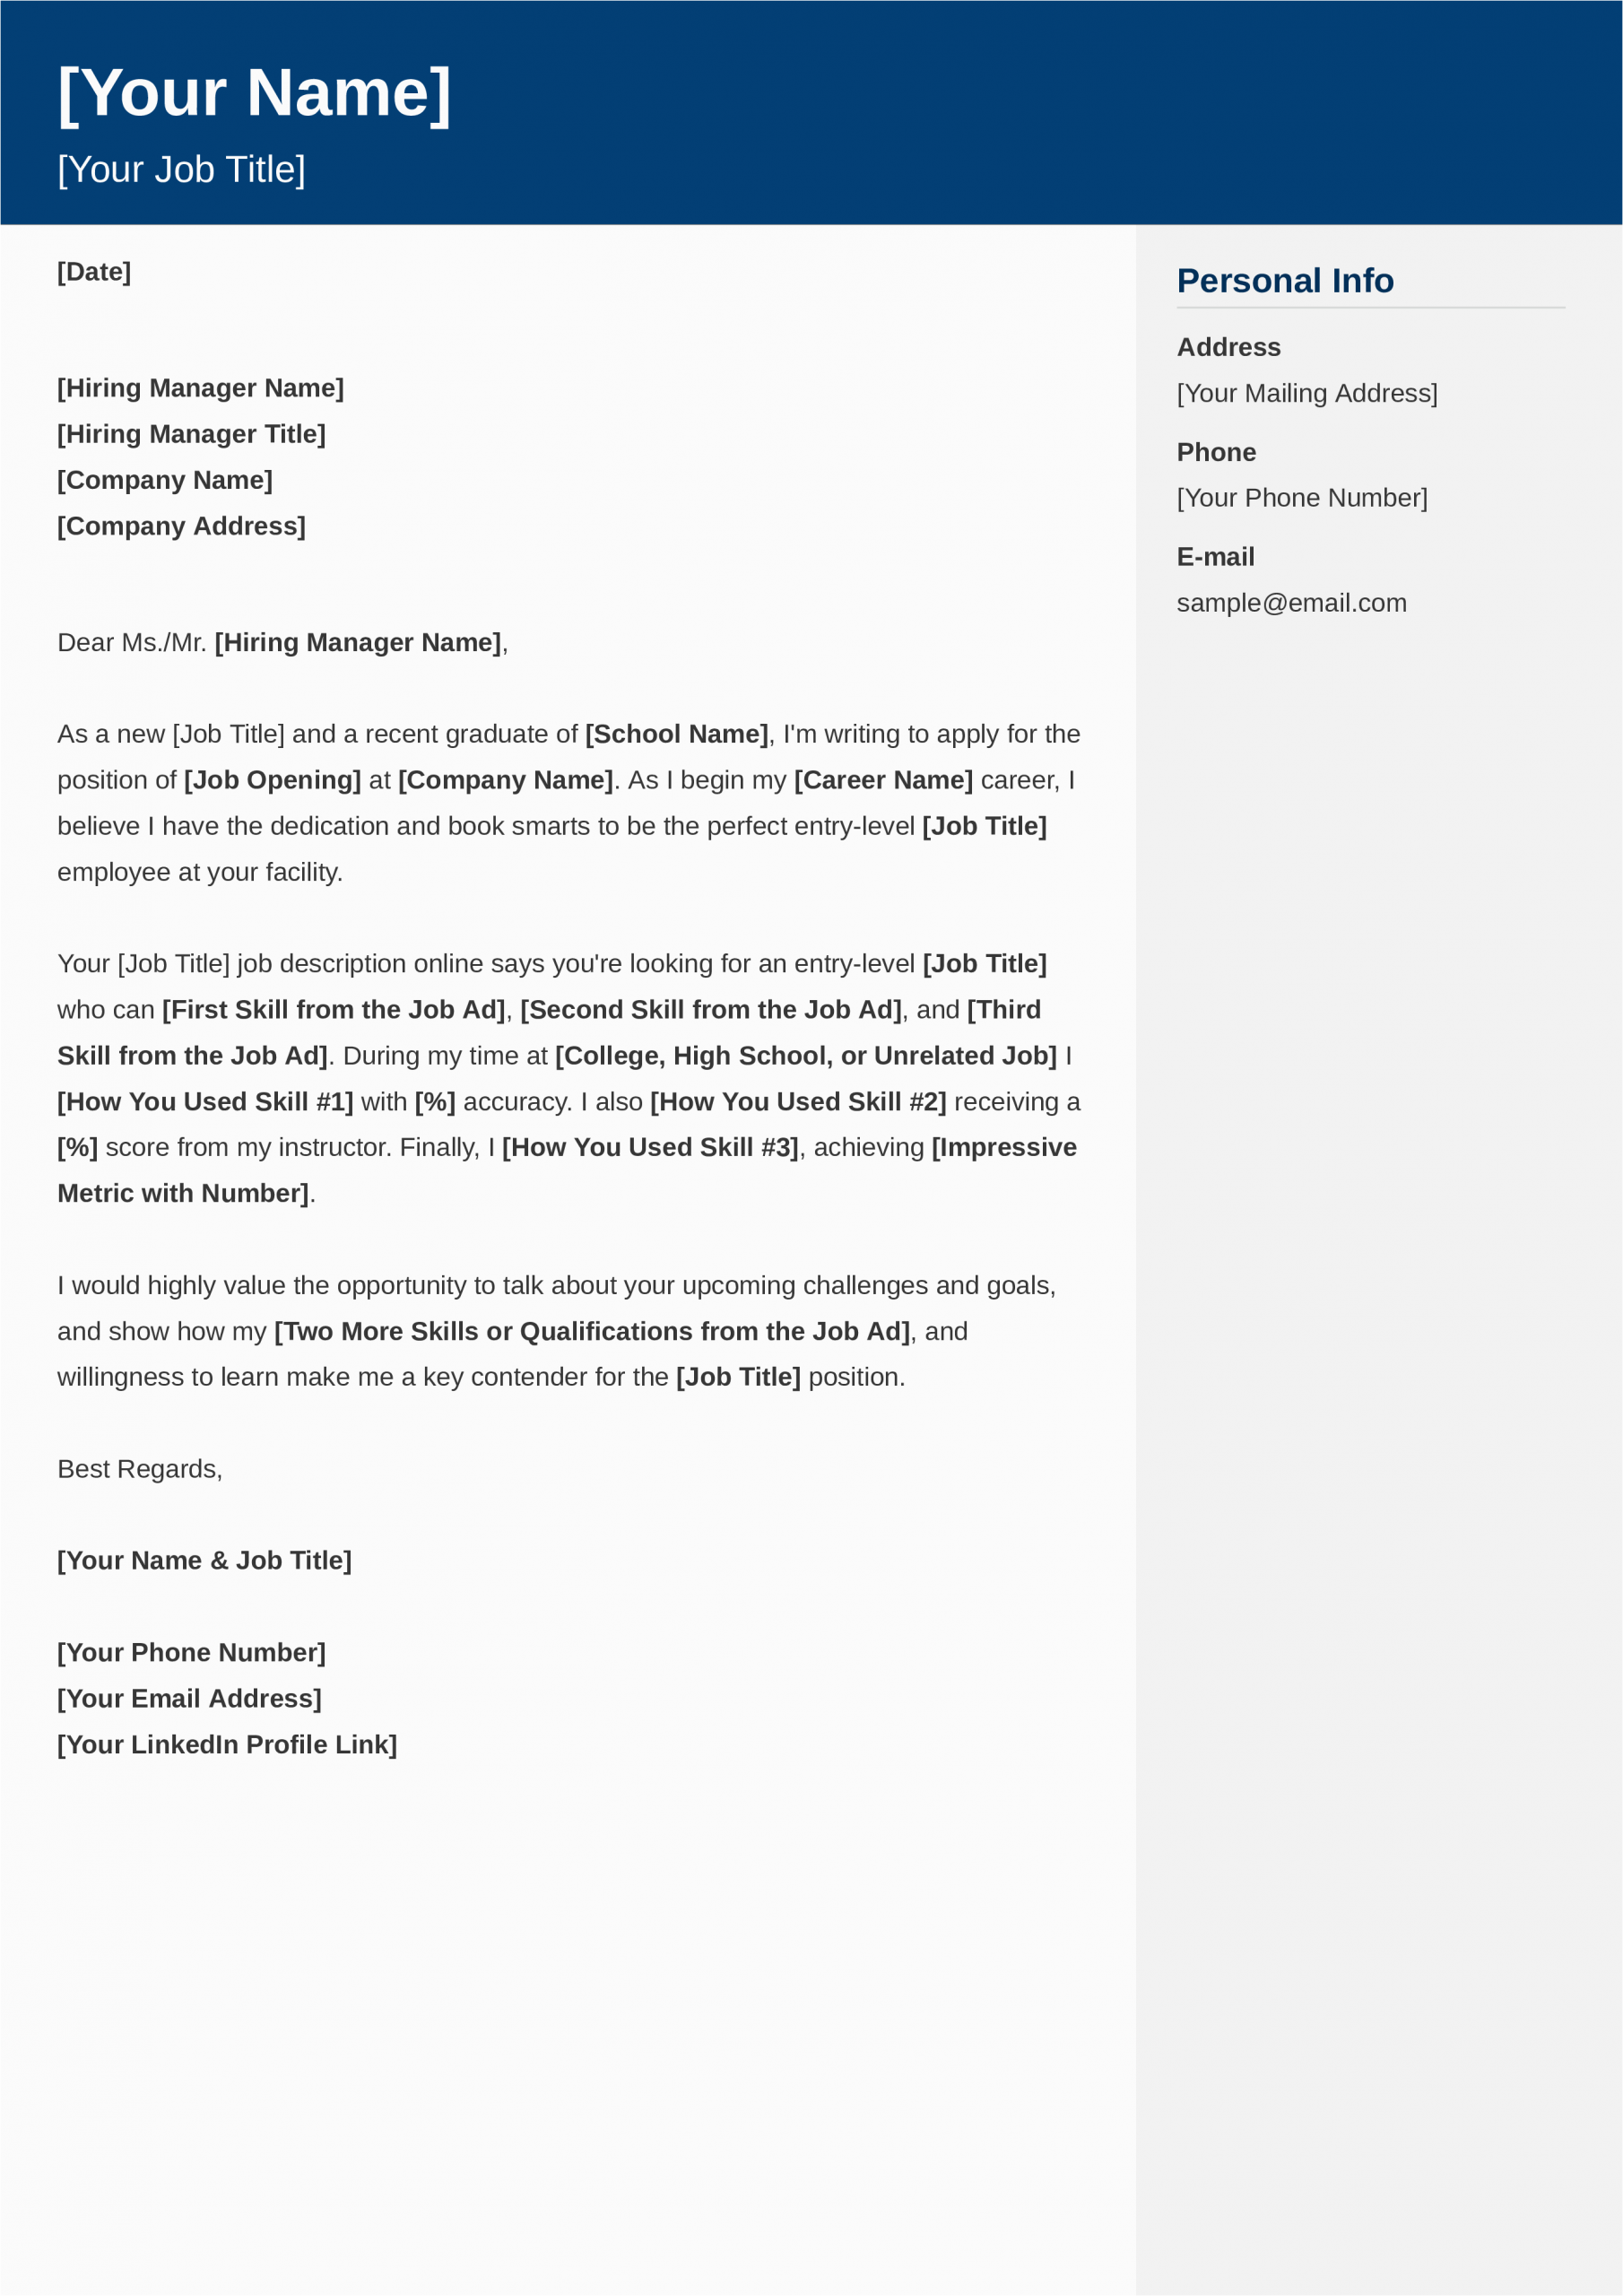 generic cover letter examples collection